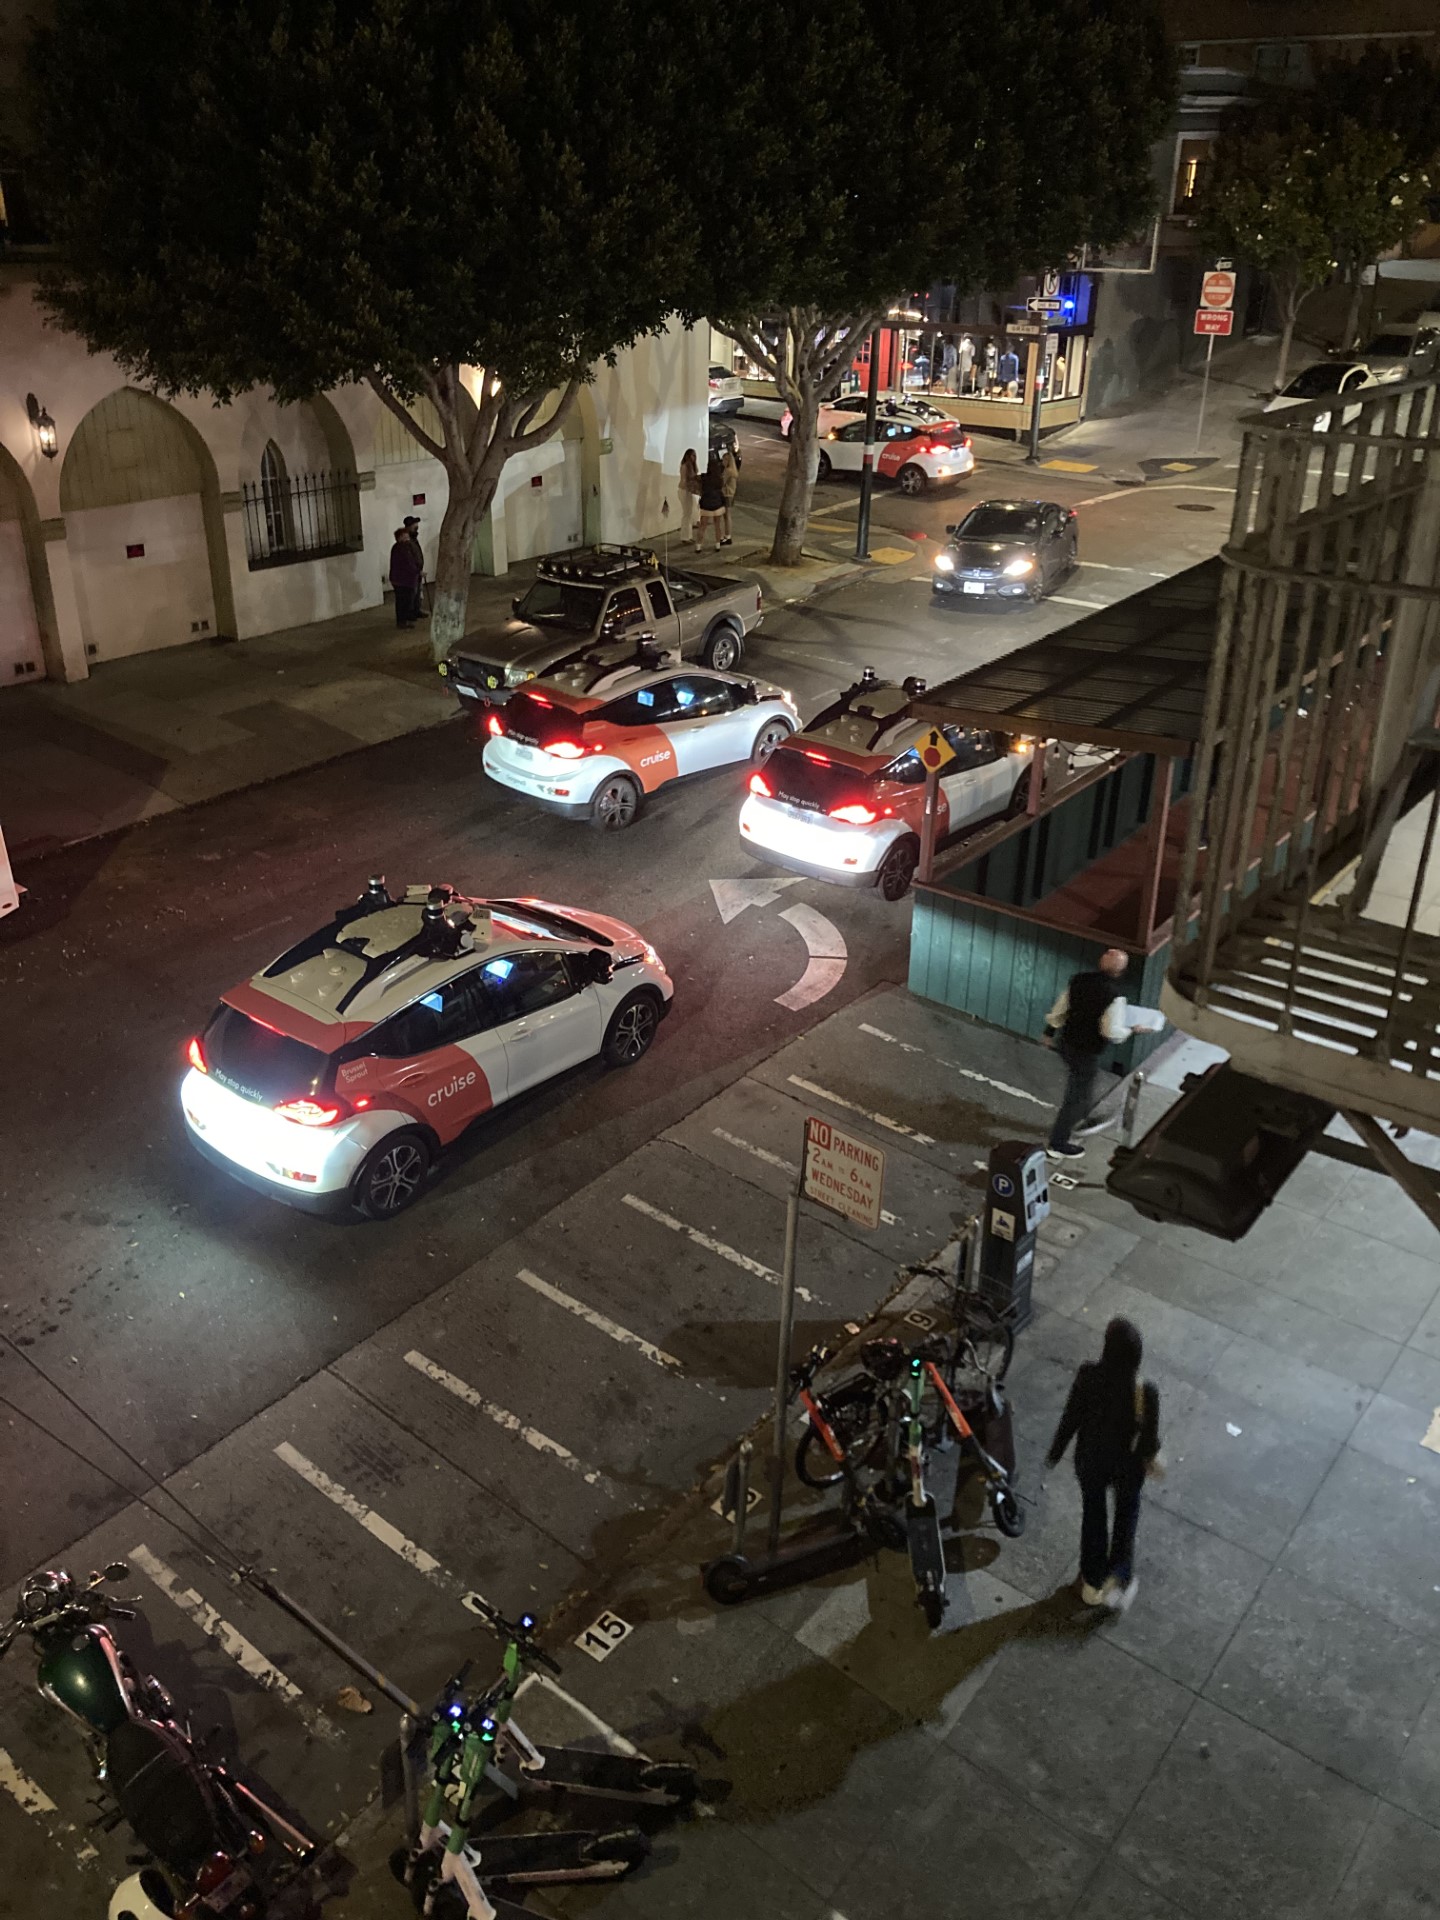 Cell phone image overlooking a San Francisco Street at nighttime showing several Cruise robotaxis stopped on Vallejo Street in San Francisco's North Beach.